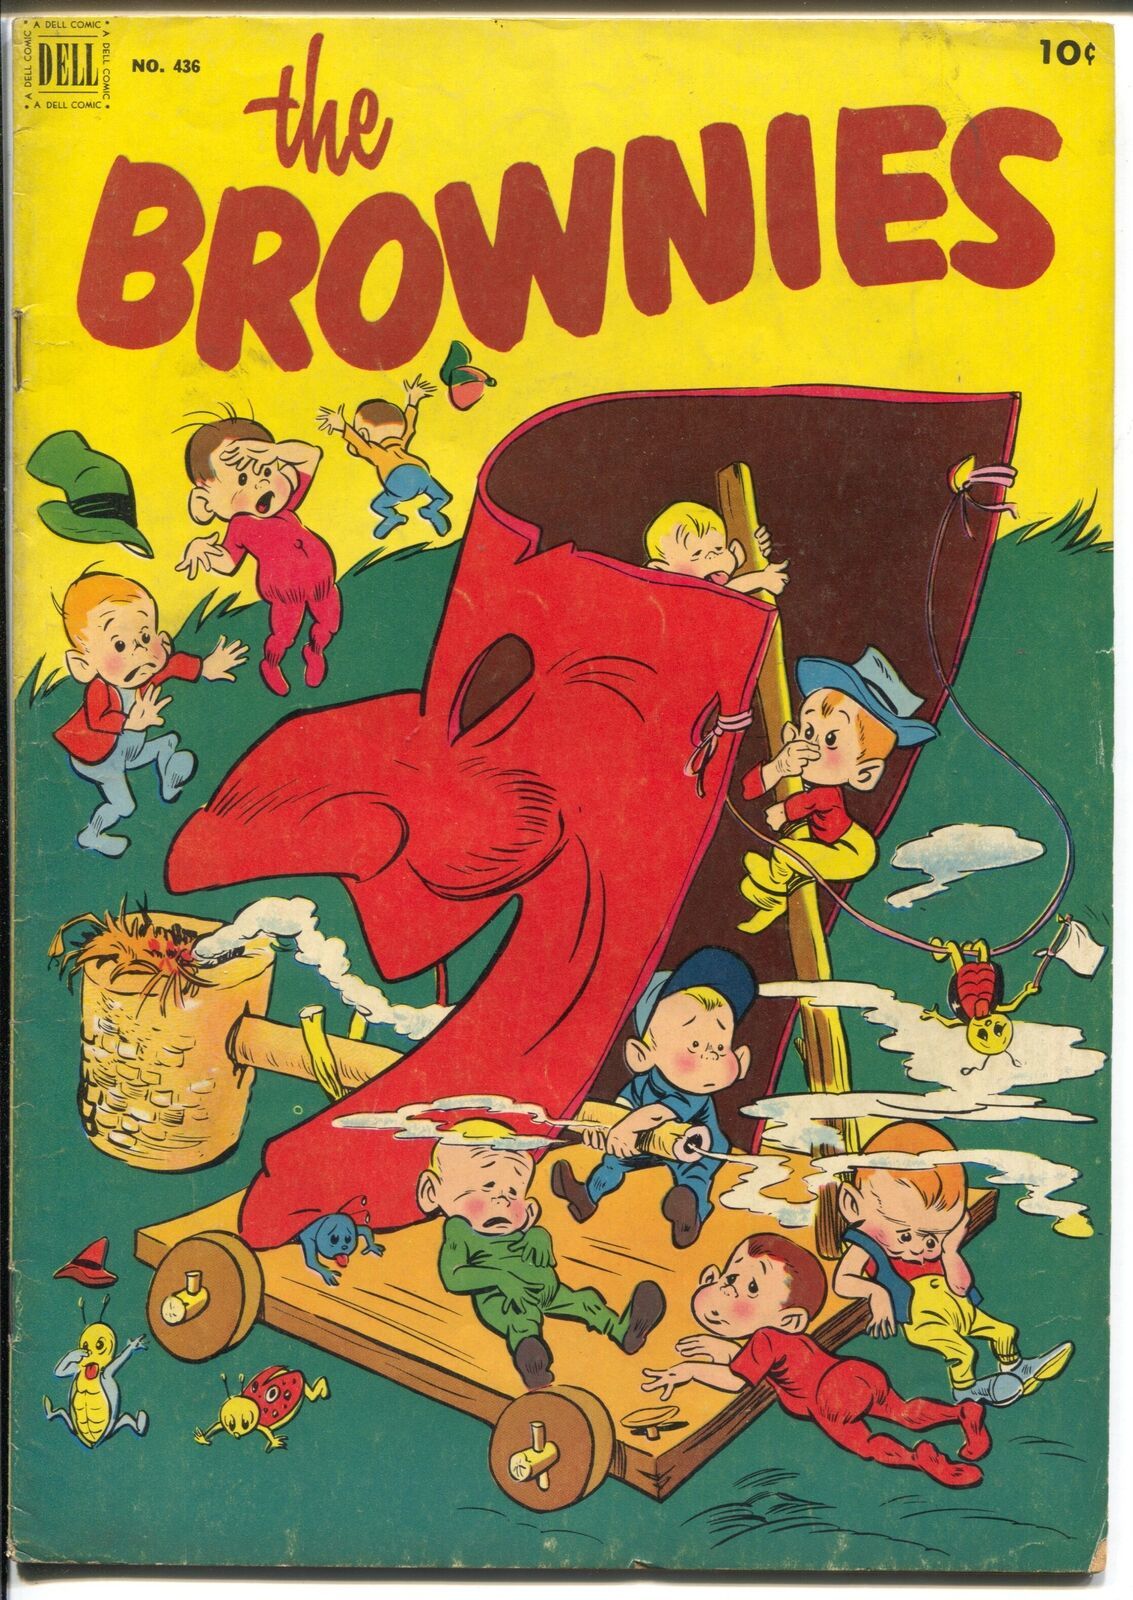 Primary image for Brownies-Four Color Comics #436-1952-Dell-humor comic-bugs & little people-VG